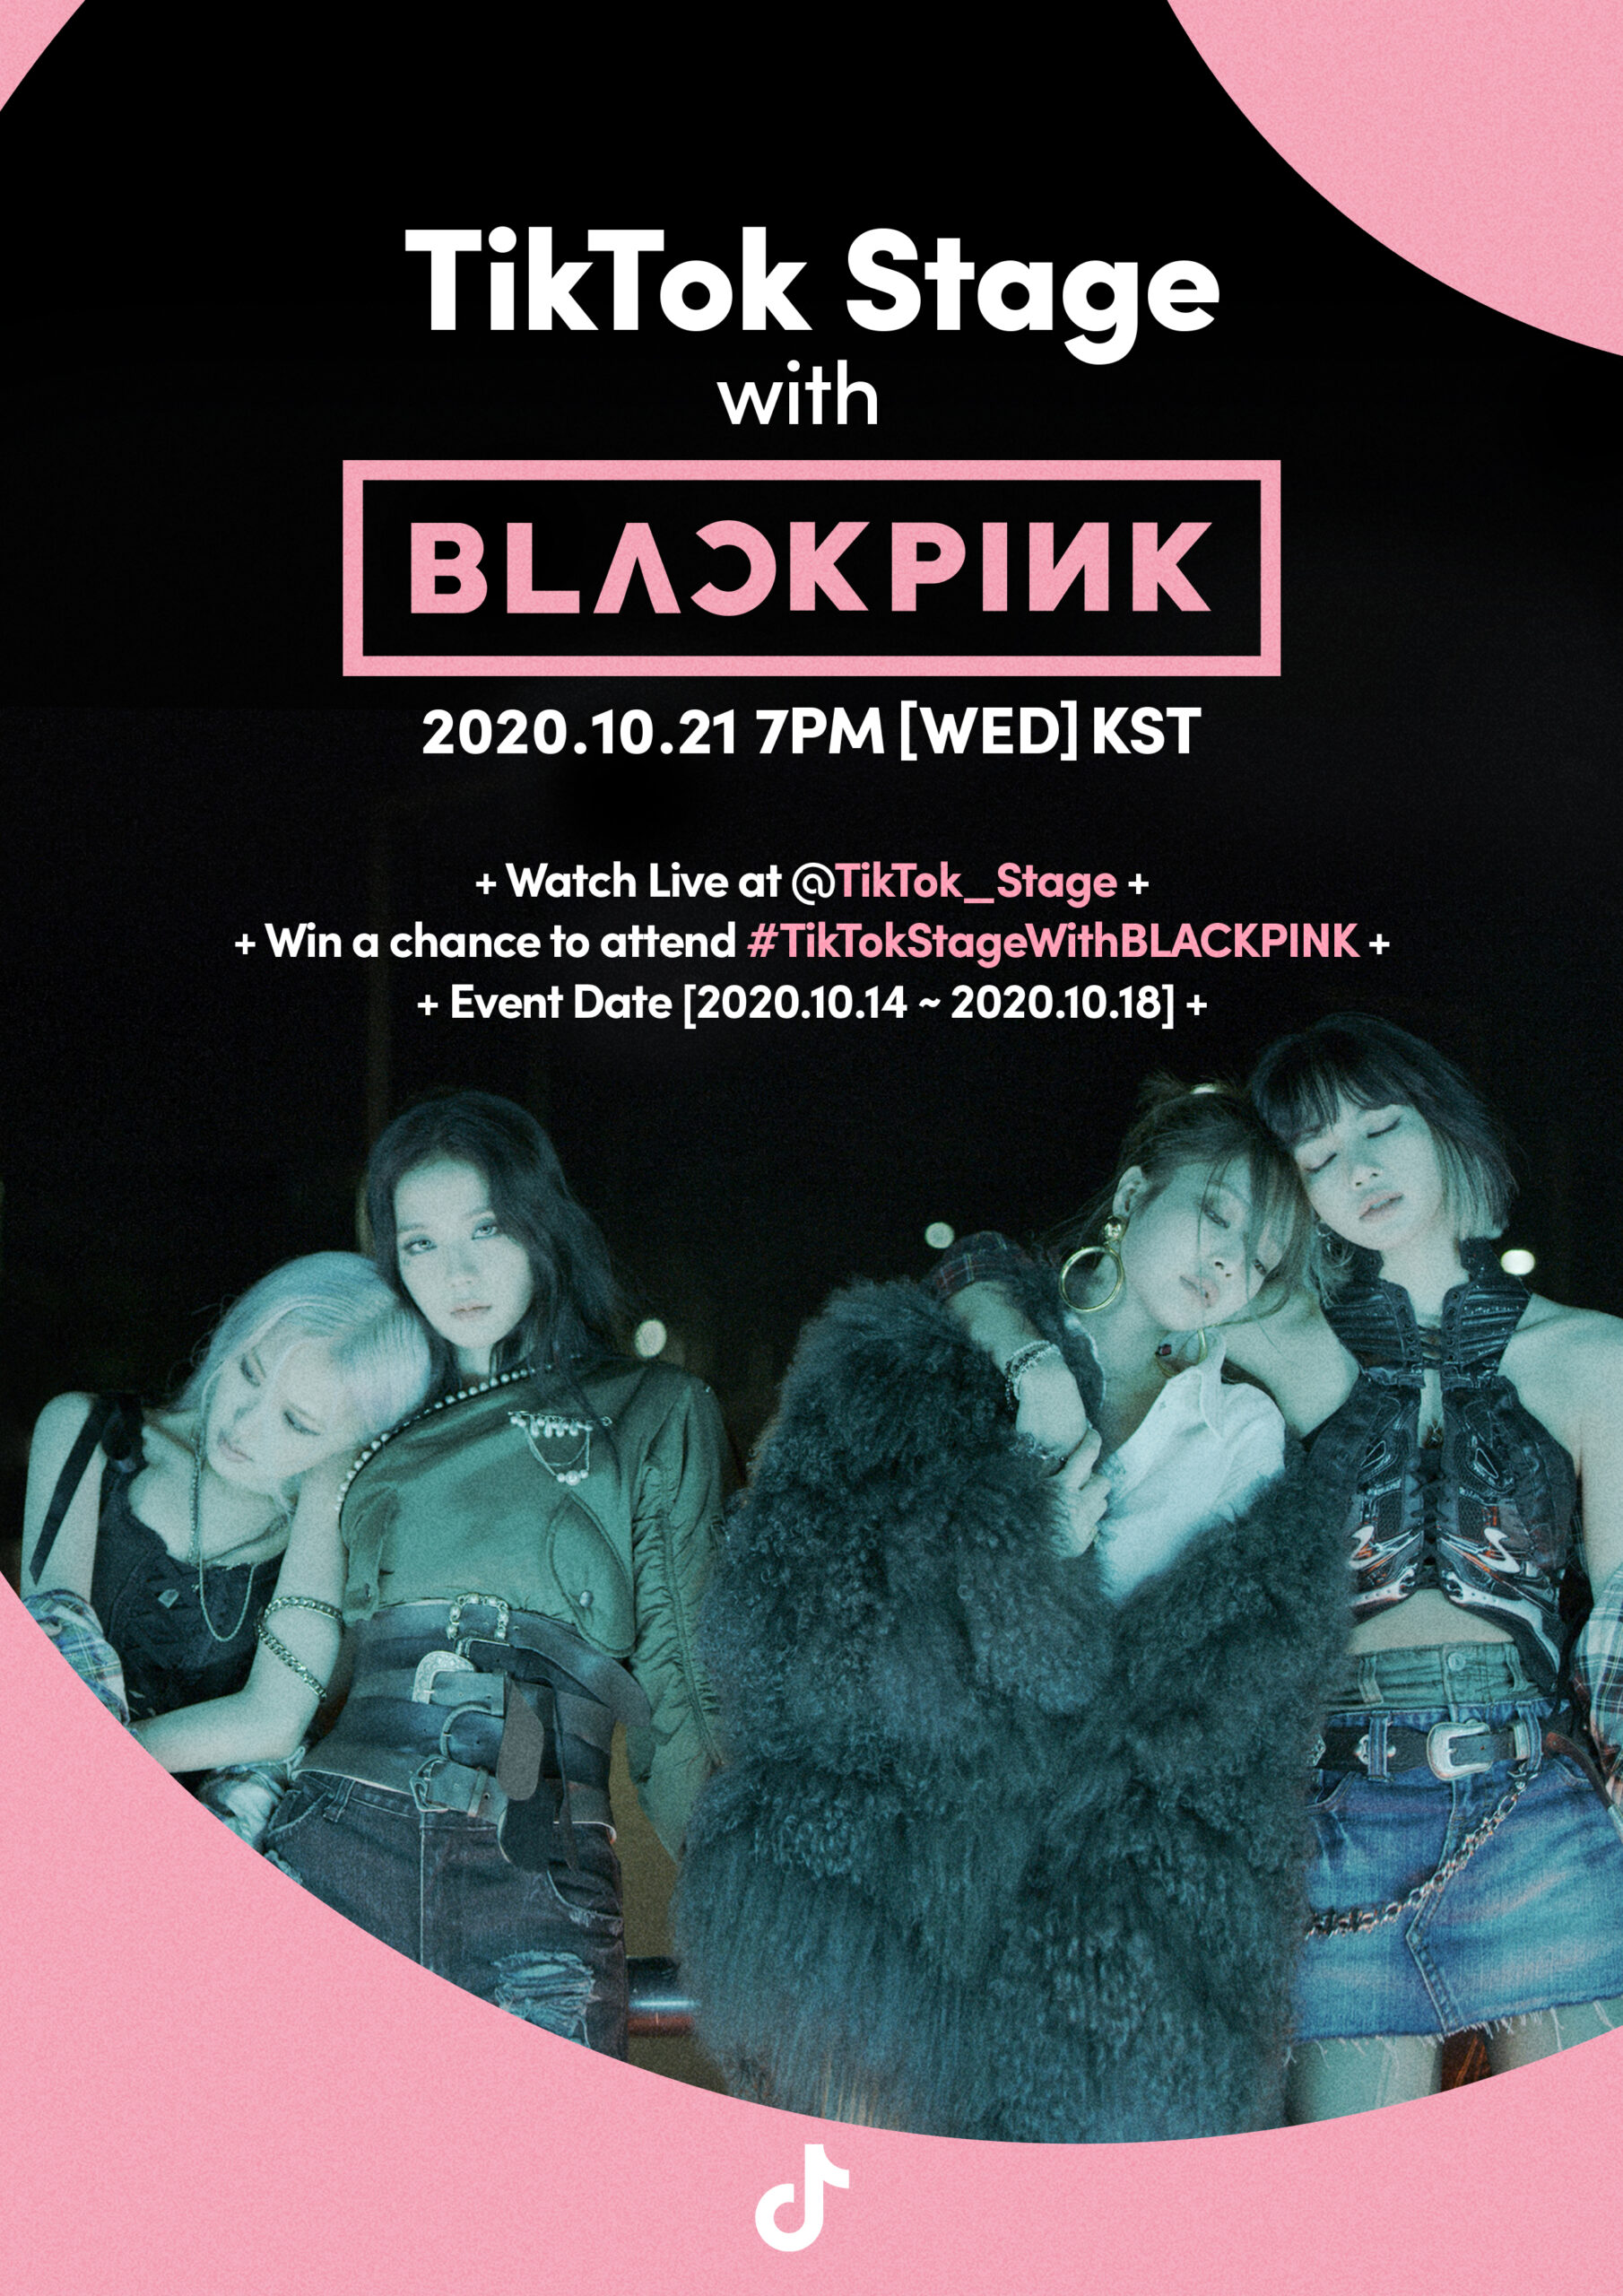 blackpink-to-meet-fans-through-100-minute-tiktok-stage-with-blackpink-on-october-21-2